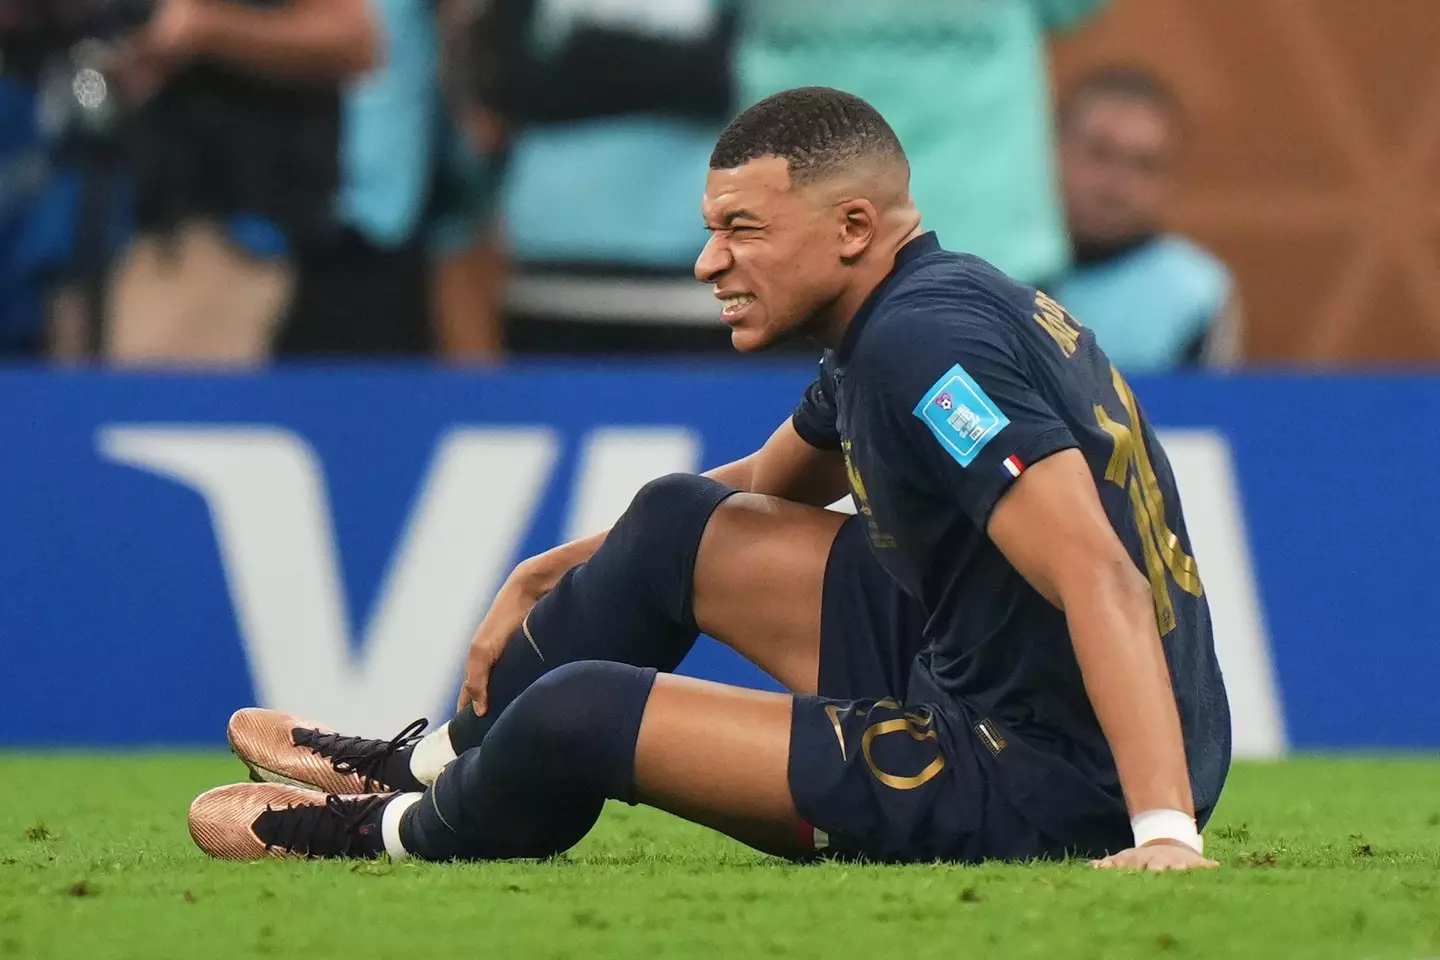 Mbappe during the World Cup final. (Image